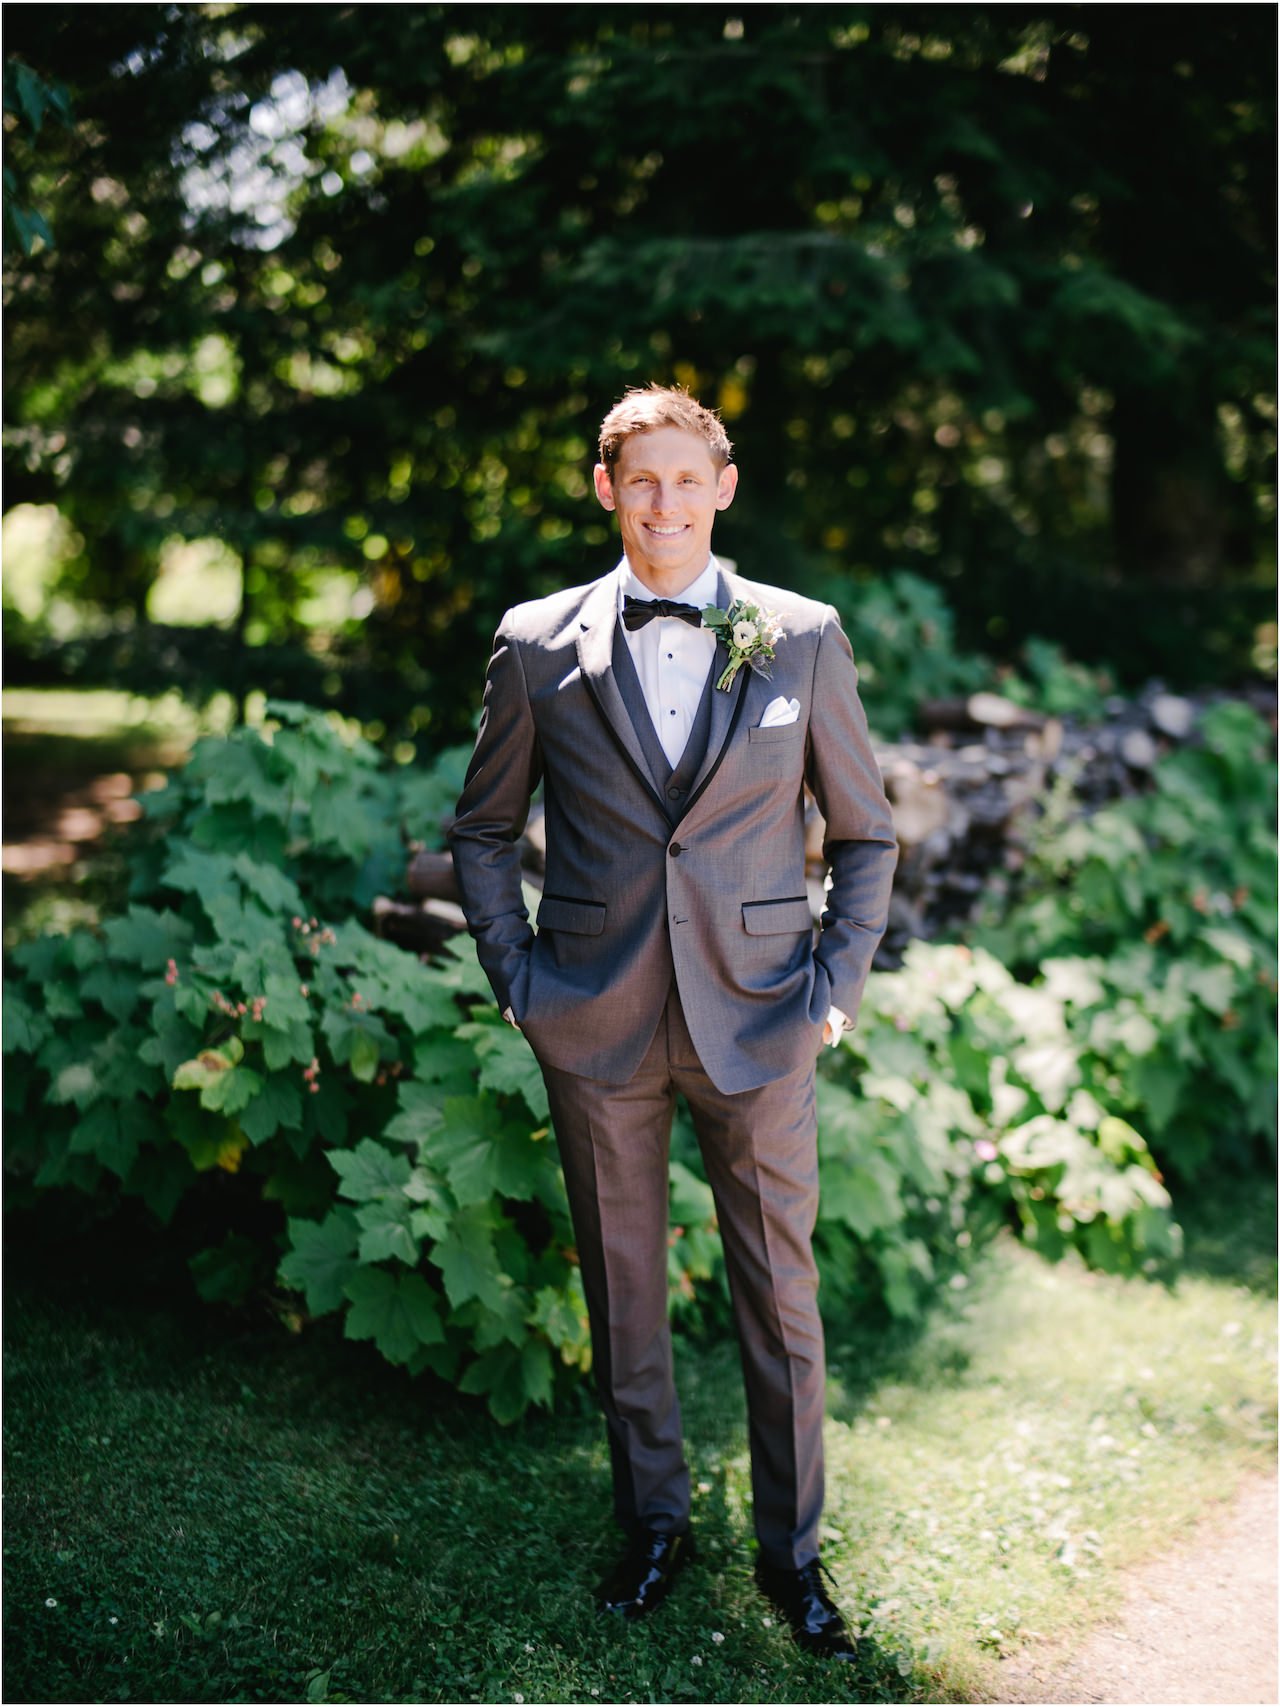  Classic groom portrait in front of wood pile surrounded by green shrubbery 